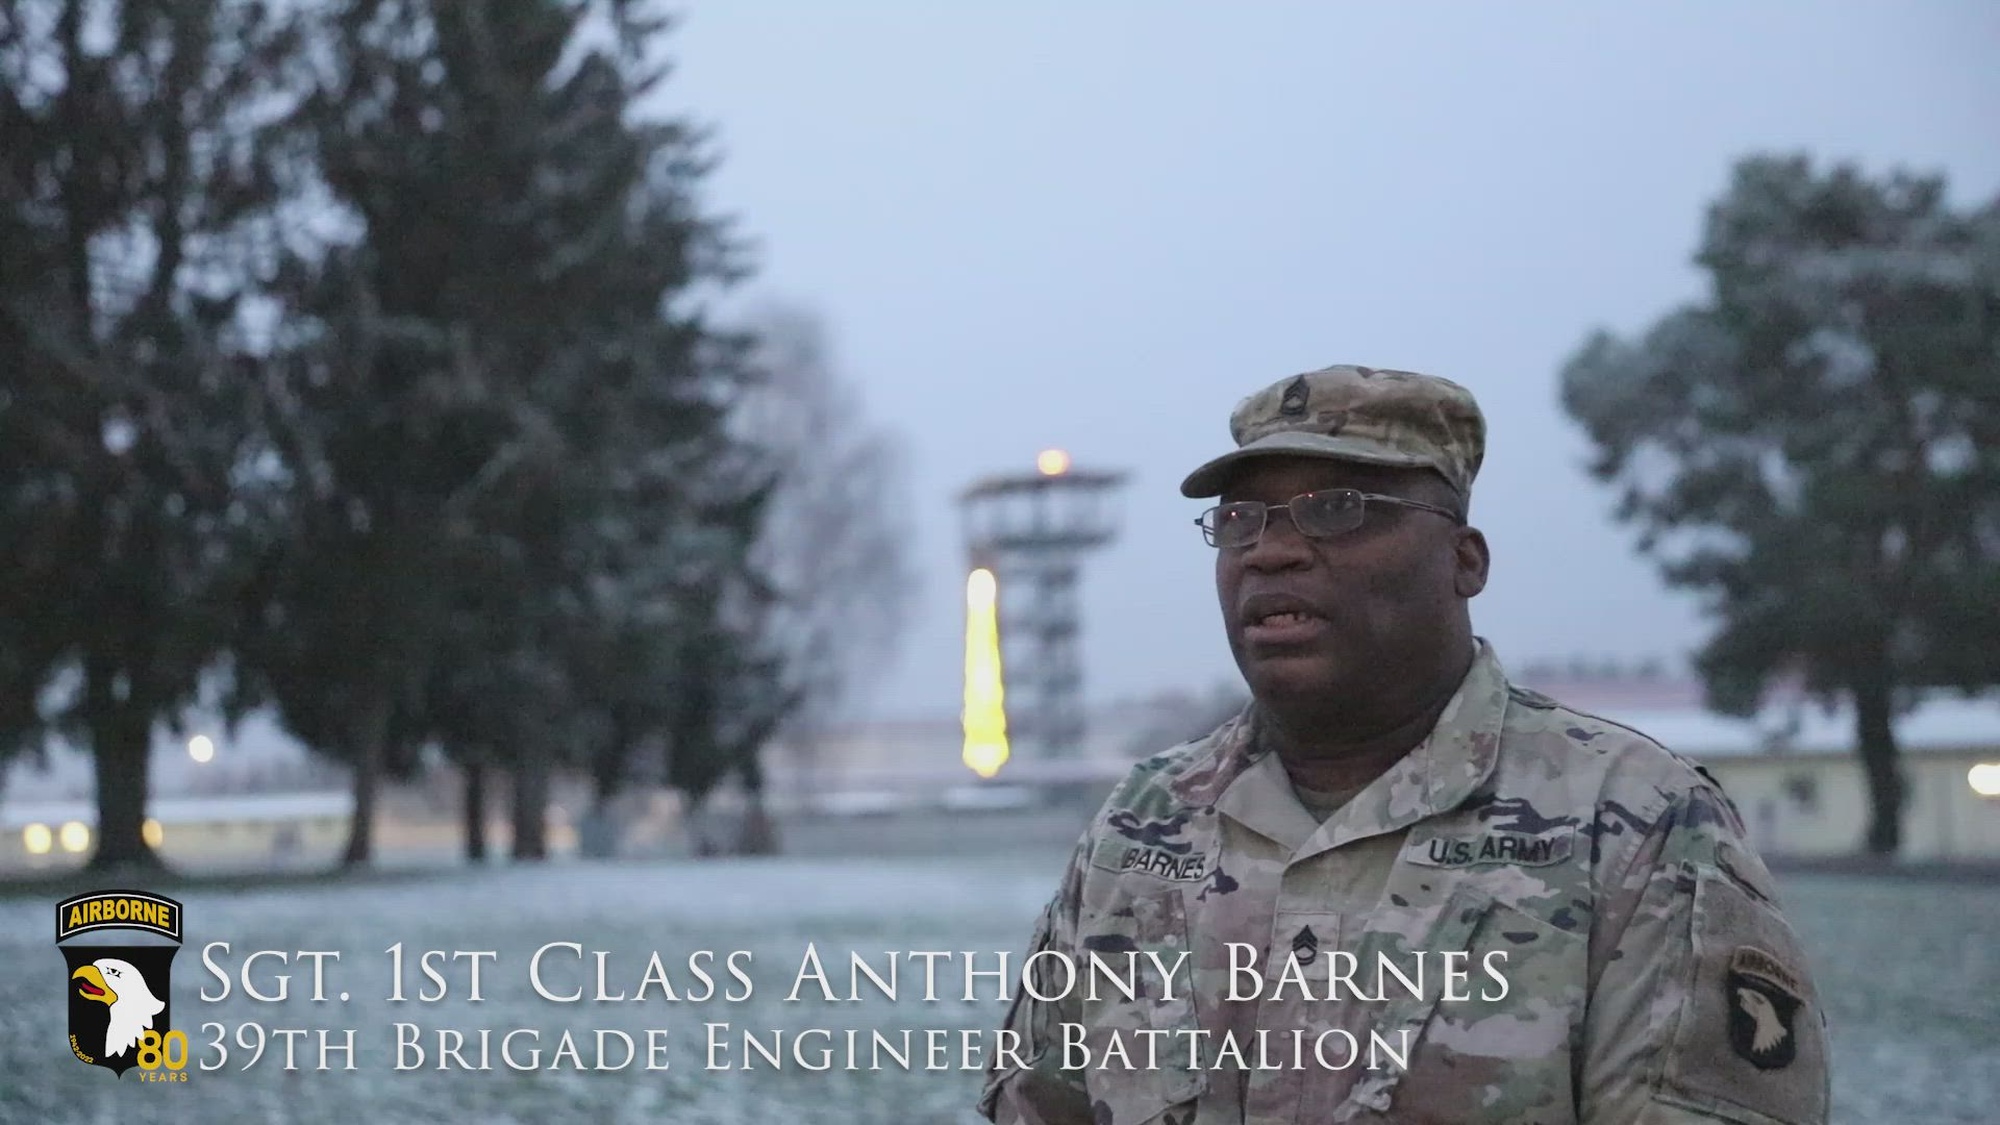 Sgt. 1st Class Anthony Barnes serves as a Culinary Management Non-Commissioned Officer in the 39th Brigade Engineer Battalion, 2nd Brigade Combat Team, 101st Airborne Division (Air Assault). He speaks about his daily duties and the most rewarding part of his job. (U.S. Army video by Staff Sgt. Malcolm Cohens-Ashley, 2nd Brigade Combat Team Public Affairs.)